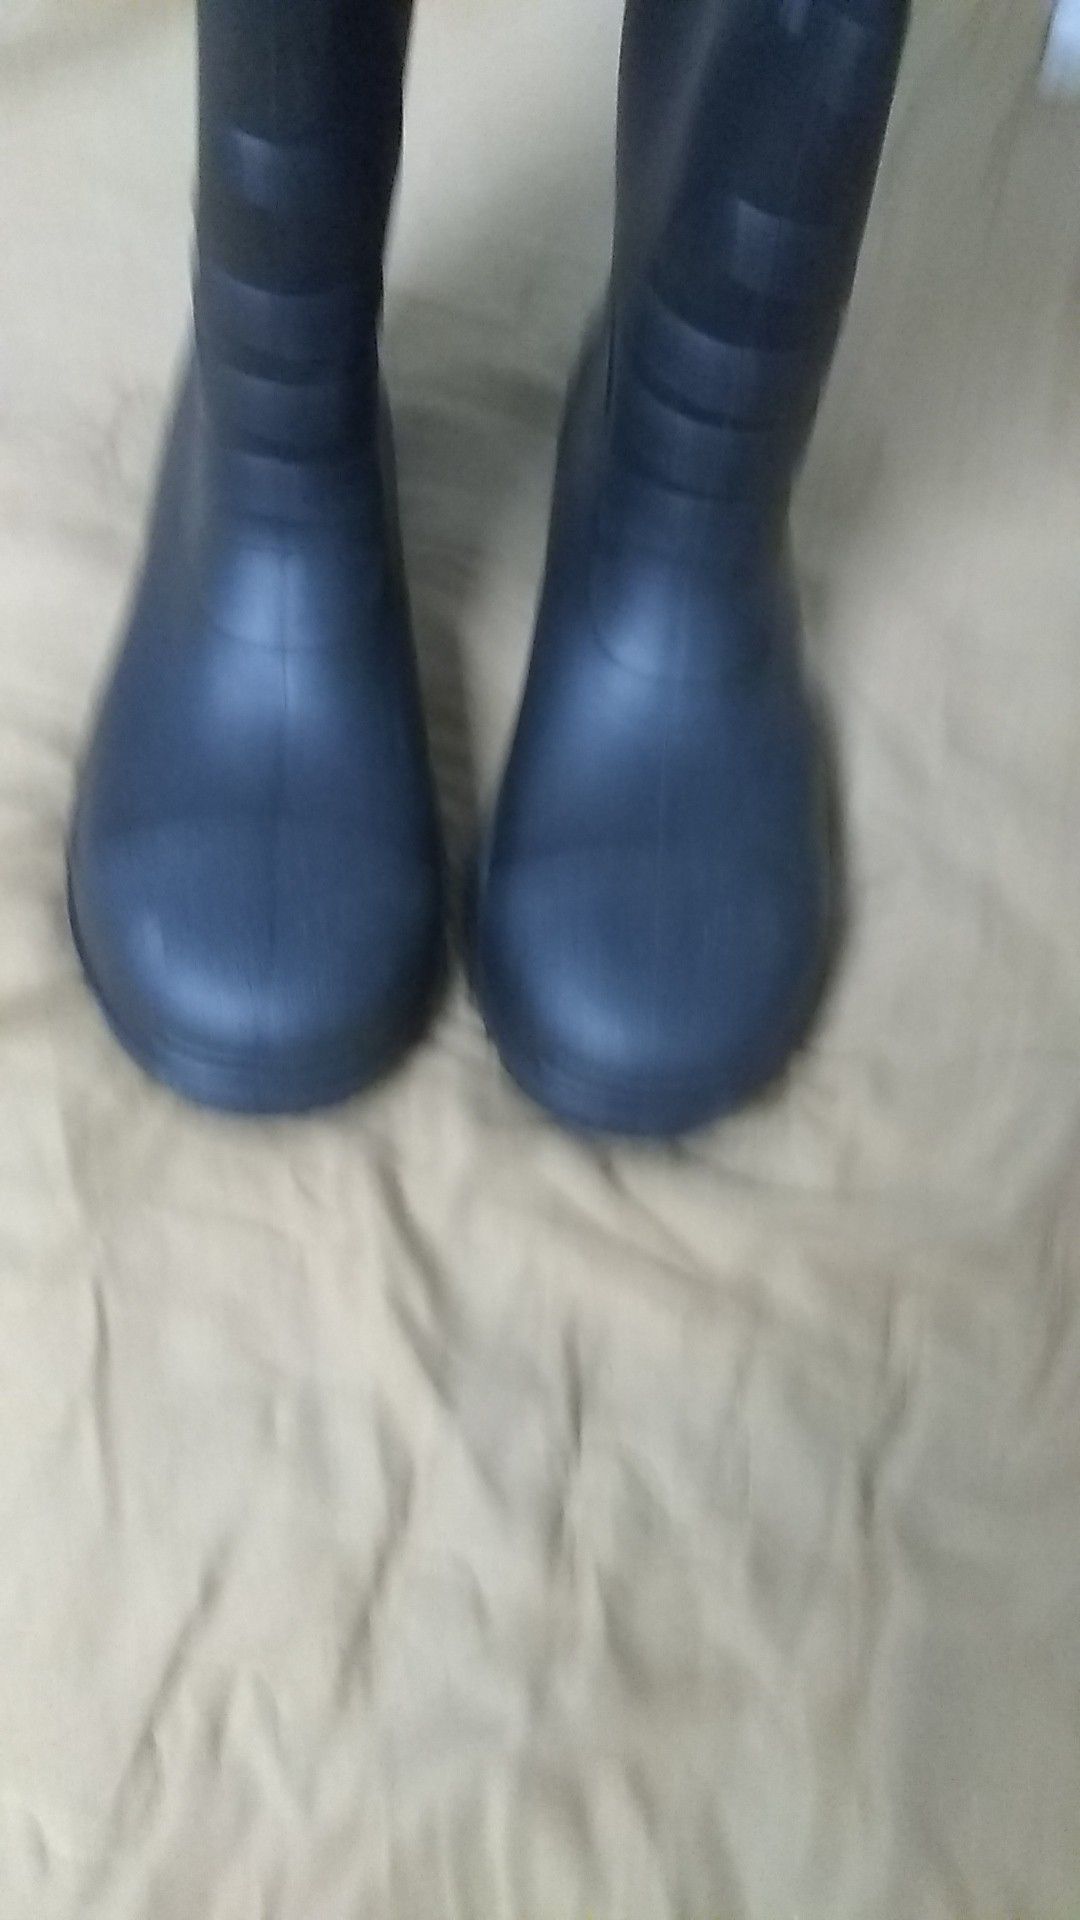 Rubber work boots Size 12 mens